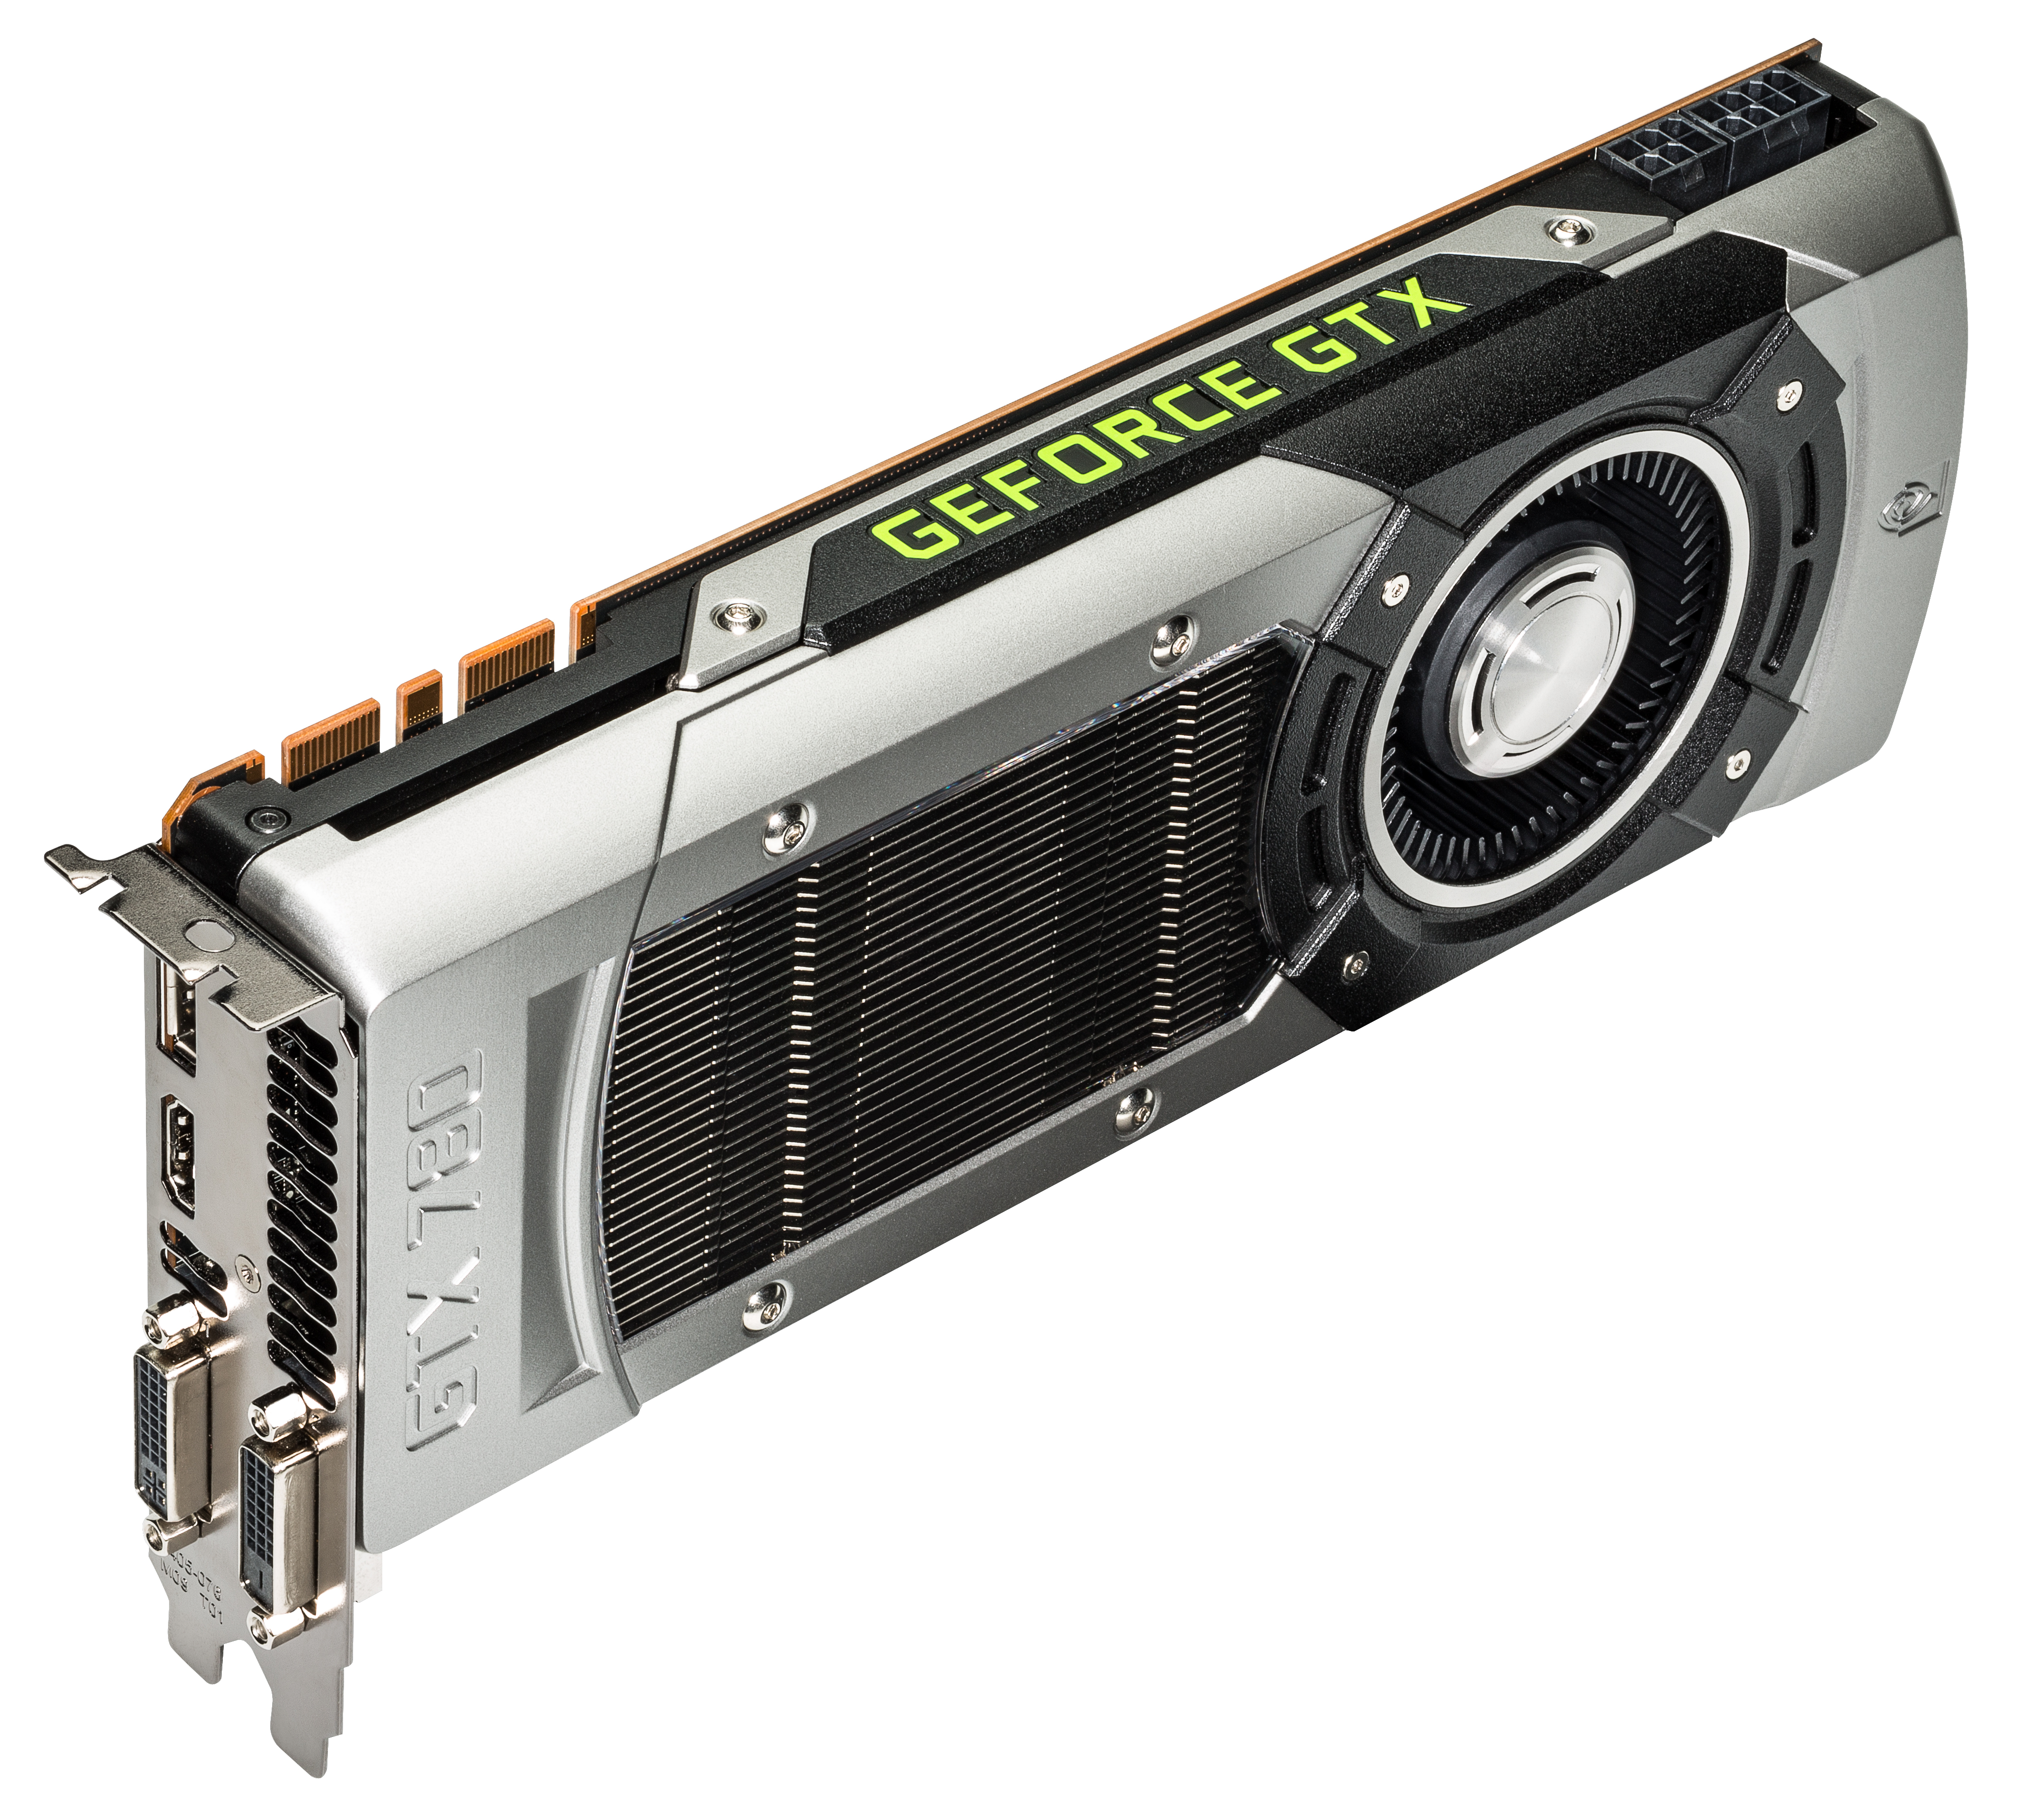 NVIDIA GeForce GTX 780 Review: The New 